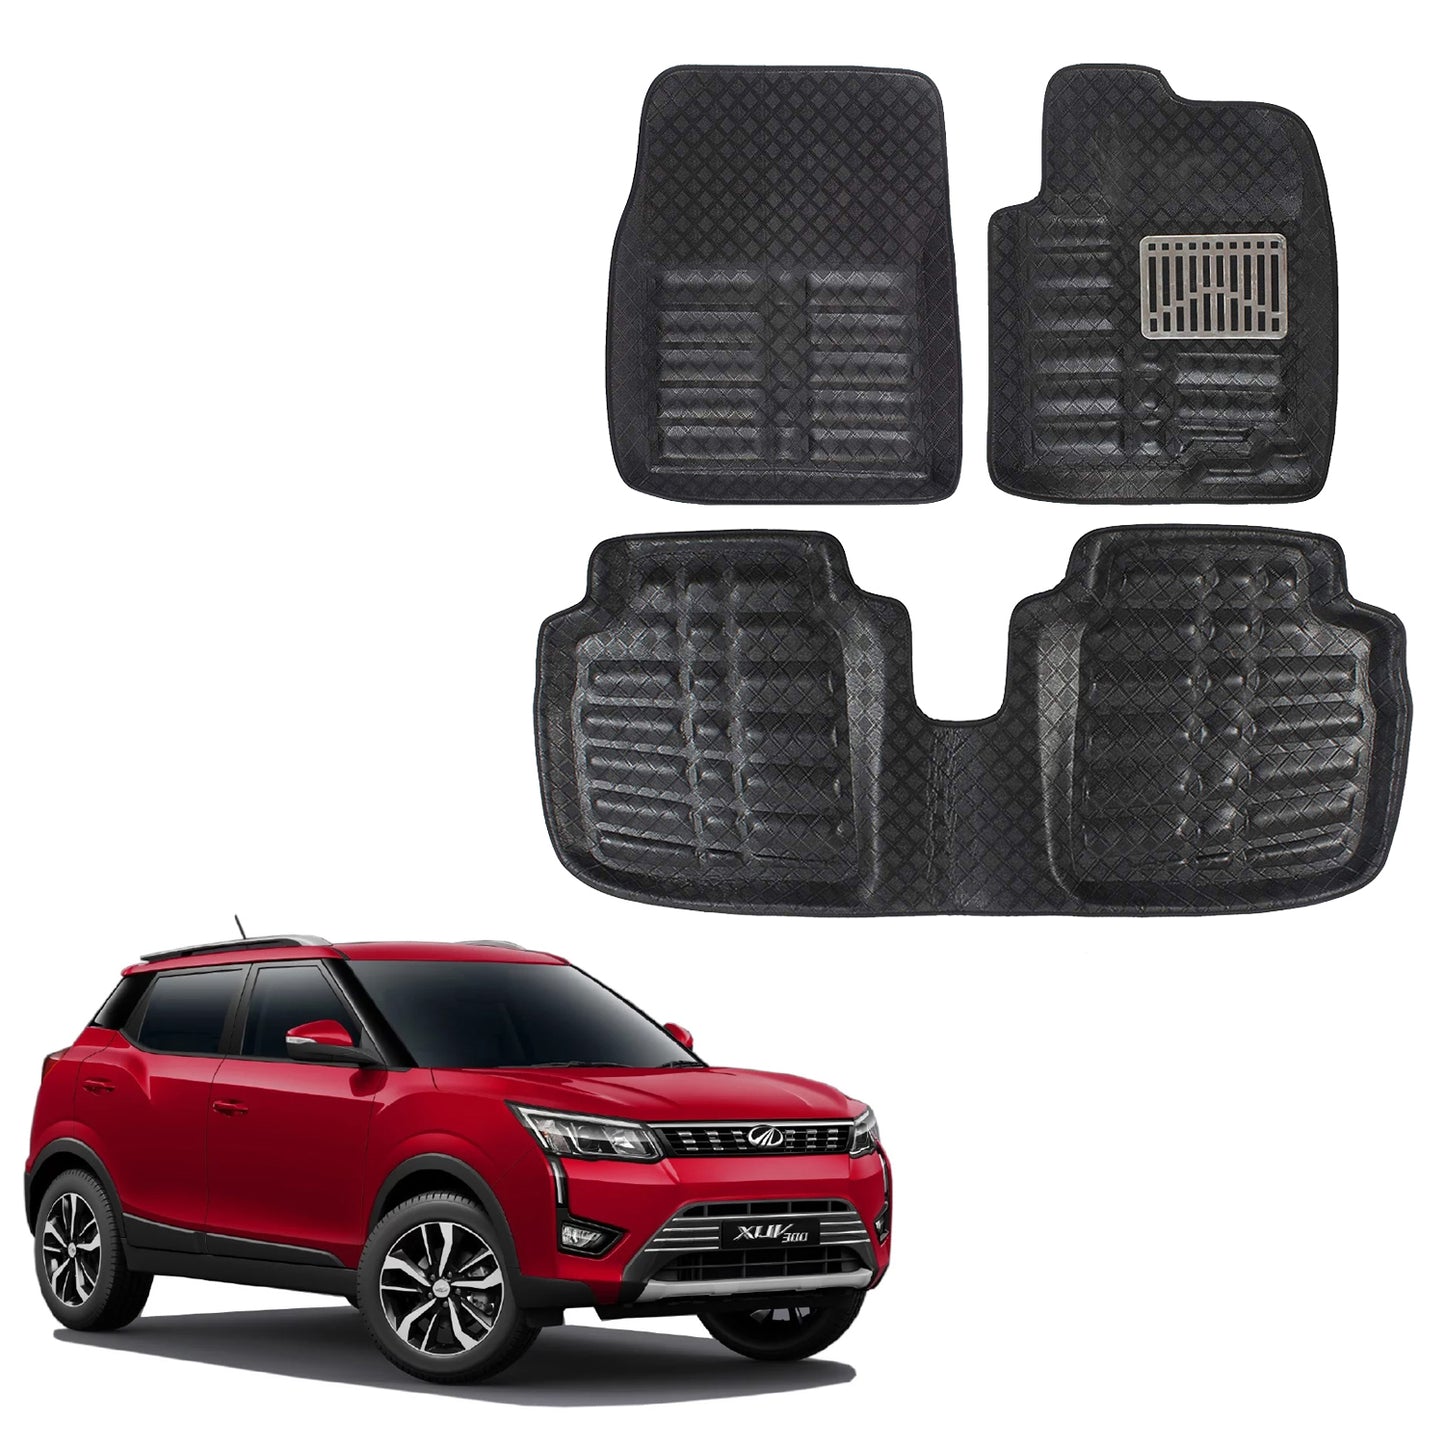 Oshotto 4D Artificial Leather Car Floor Mats For Mahindra XUV 300 - Set of 3 (2 pcs Front & one Long Single Rear pc) - Black